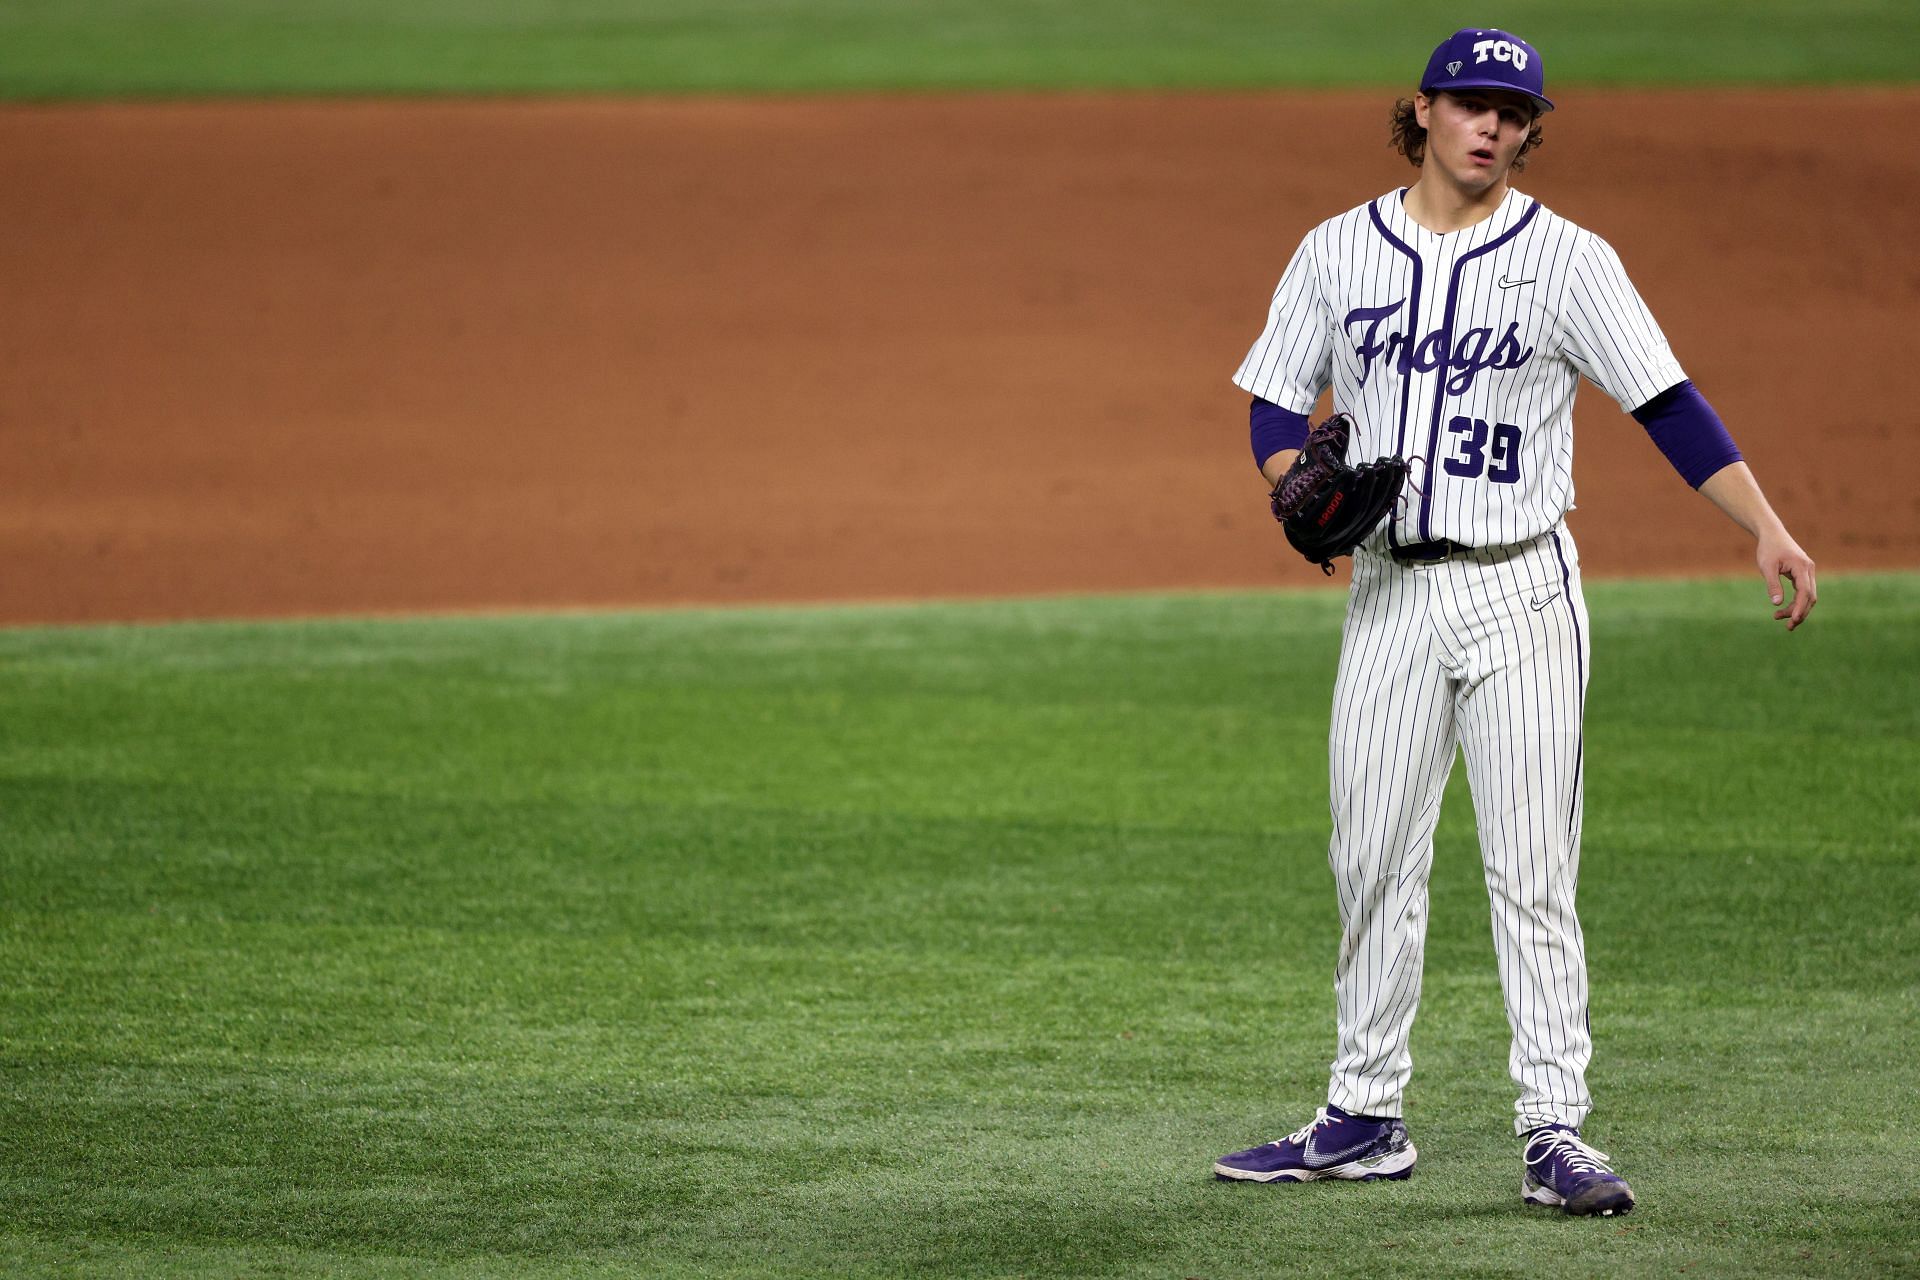 TCU have scored 12 or more runs in their last four games.